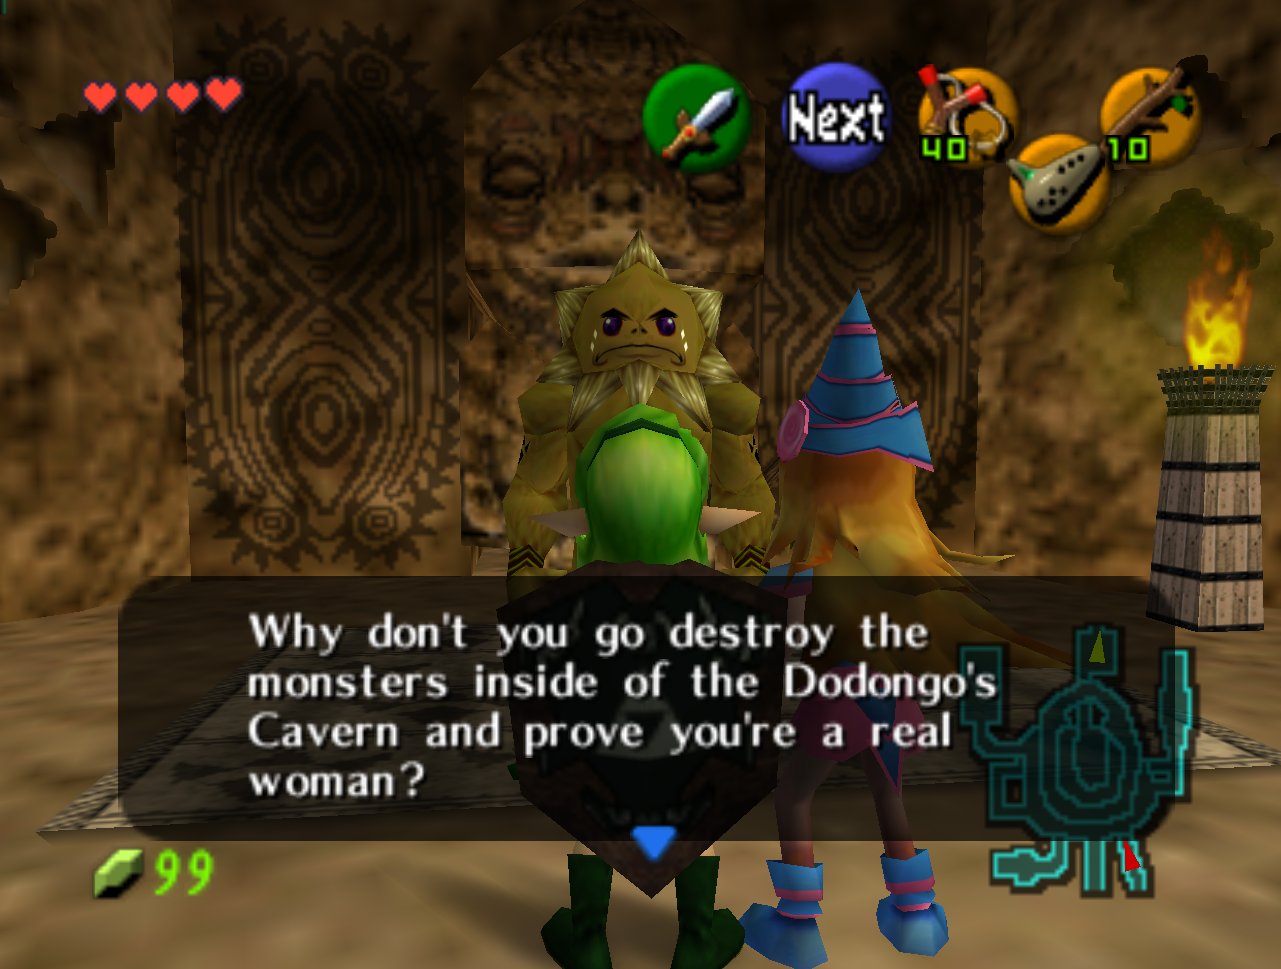 Is Ocarina of Time a gay coming-of-age story? – Destructoid